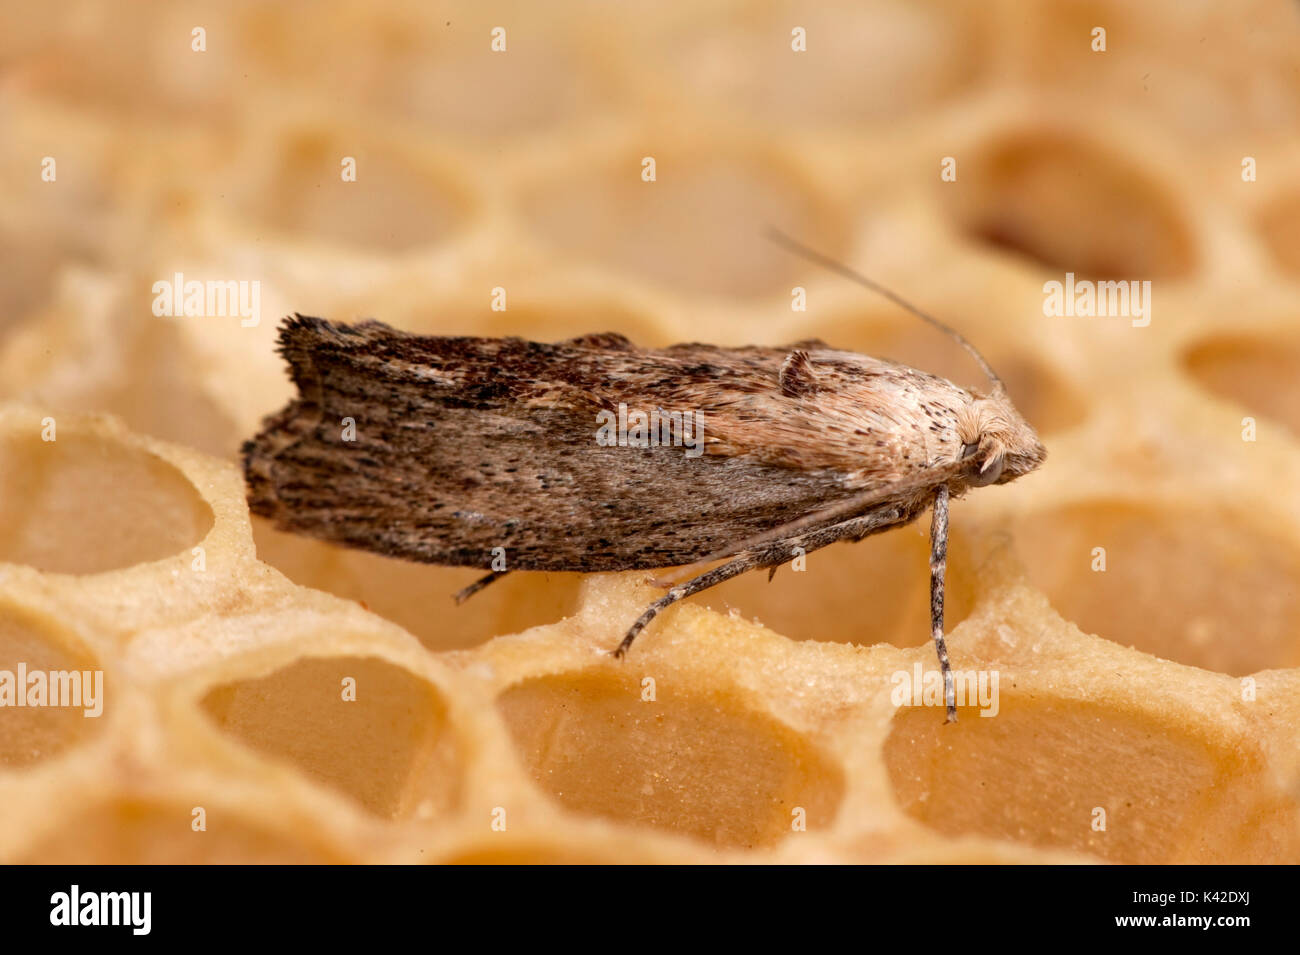 Greater Wax Moth, Galleria mellonella, pest to Honey Bee, Apis mellifera, Kent UK, caterpillars or larvae feed on  honeycomb which damage the colony a Stock Photo